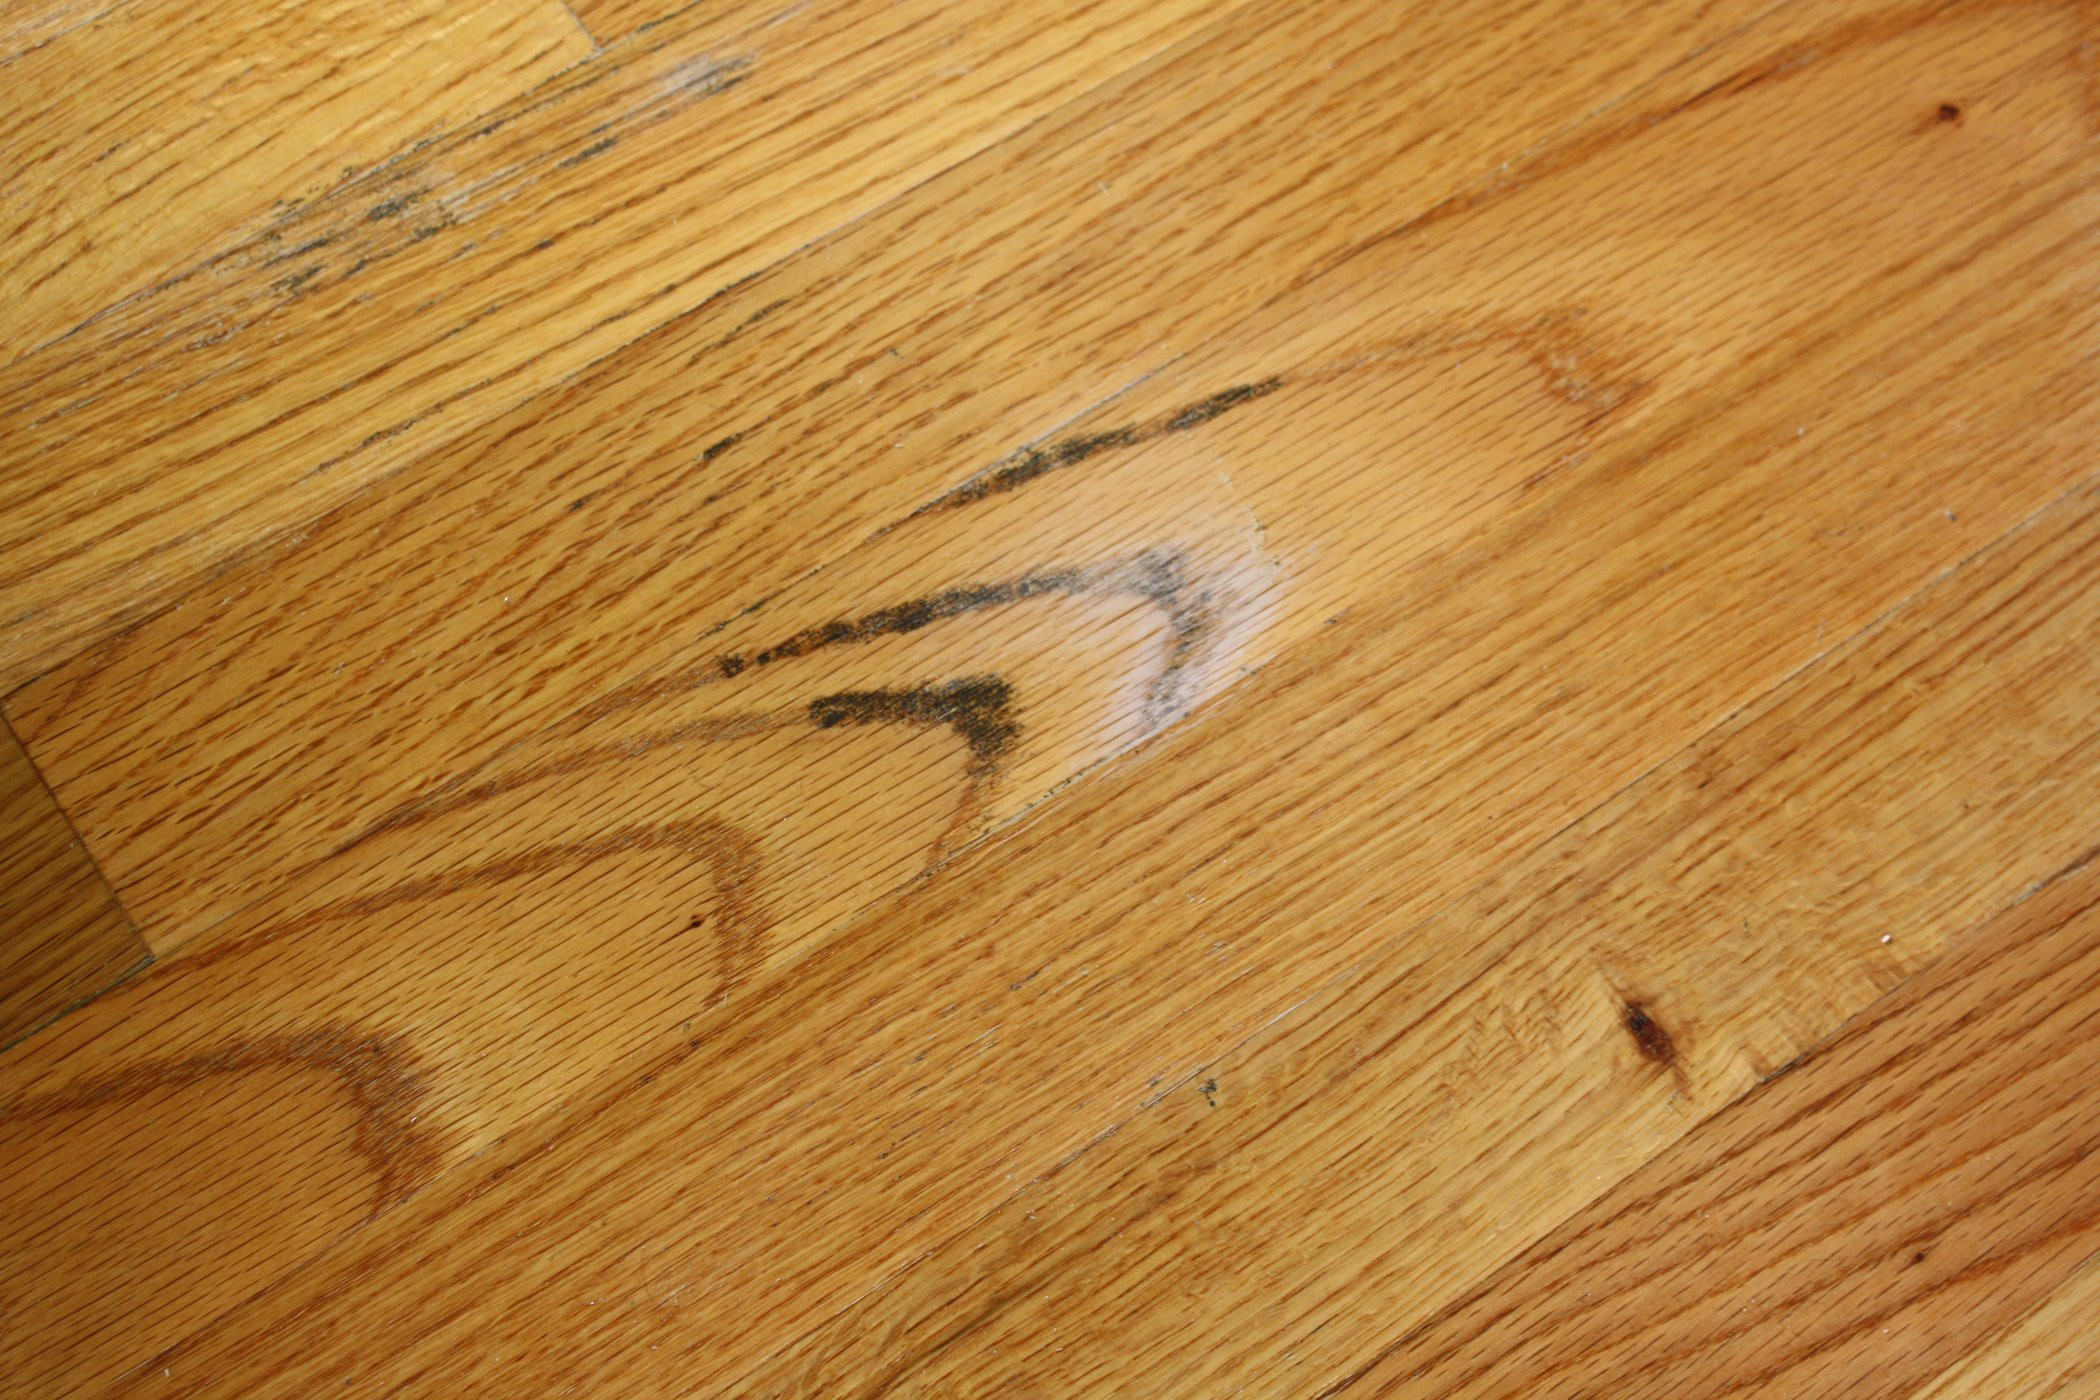 hardwood floor cleaning companies near me of how to clean mold from a wood floor 4 steps regarding fylcmqyg7dyp6ds